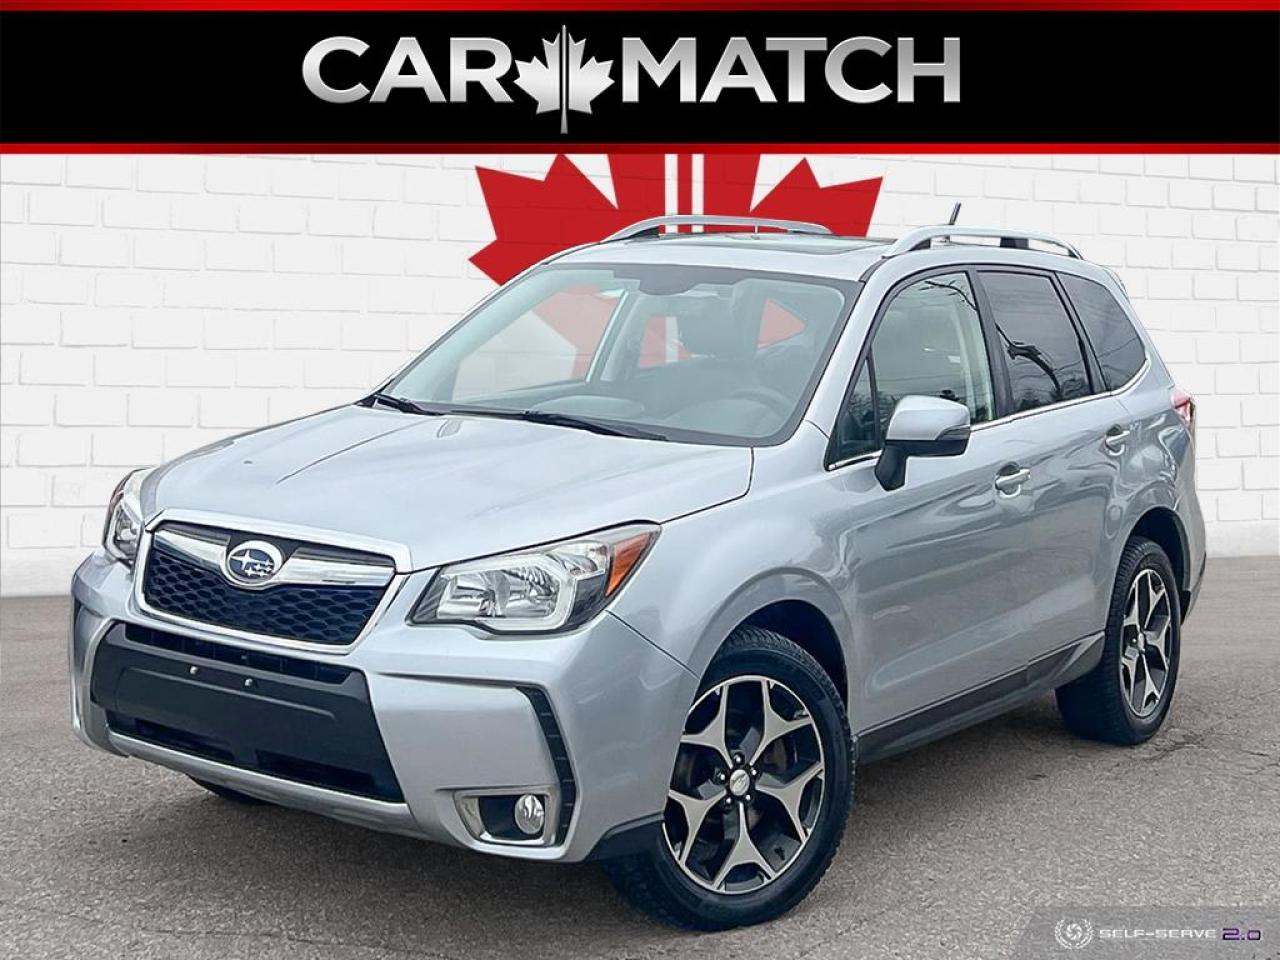 2014 Subaru Forester XT TOURING / NAV / LEATHER / ROOF / NO ACCIDENTS - Photo #1